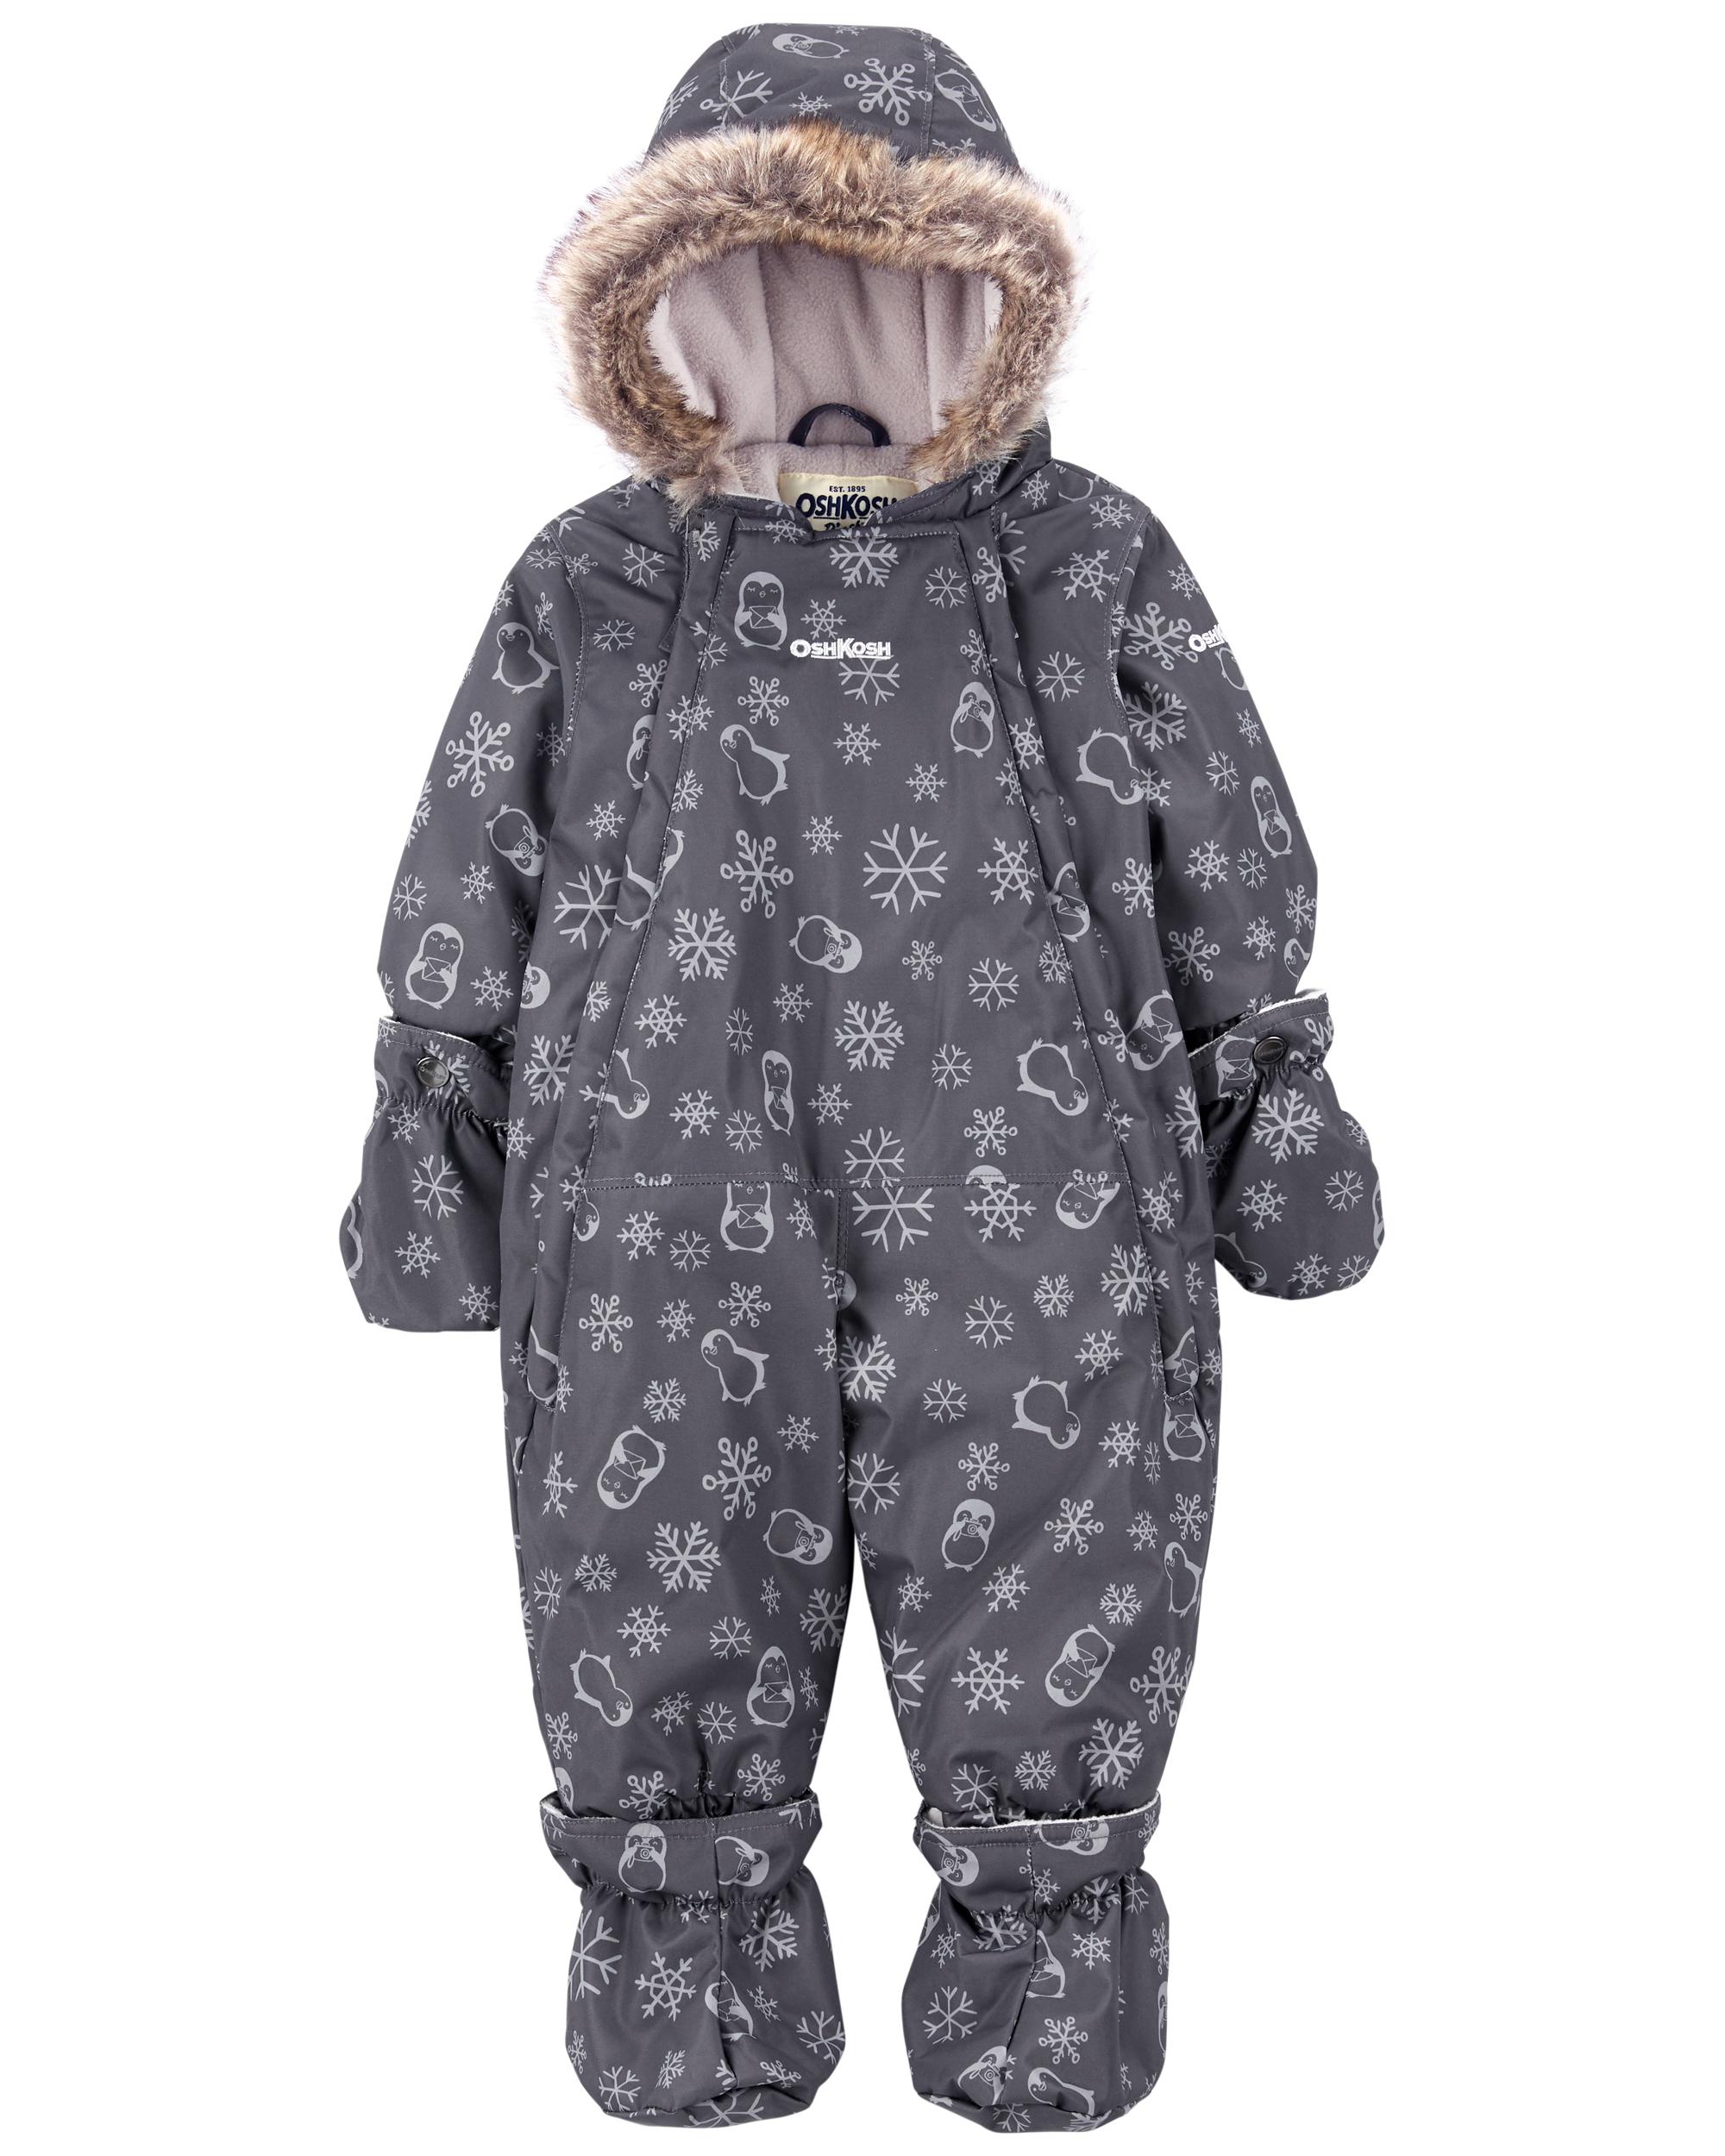 EUC Carters osh kosh one-piece baby snow suit (12 month size), Clothing -  9-12 Months, Calgary